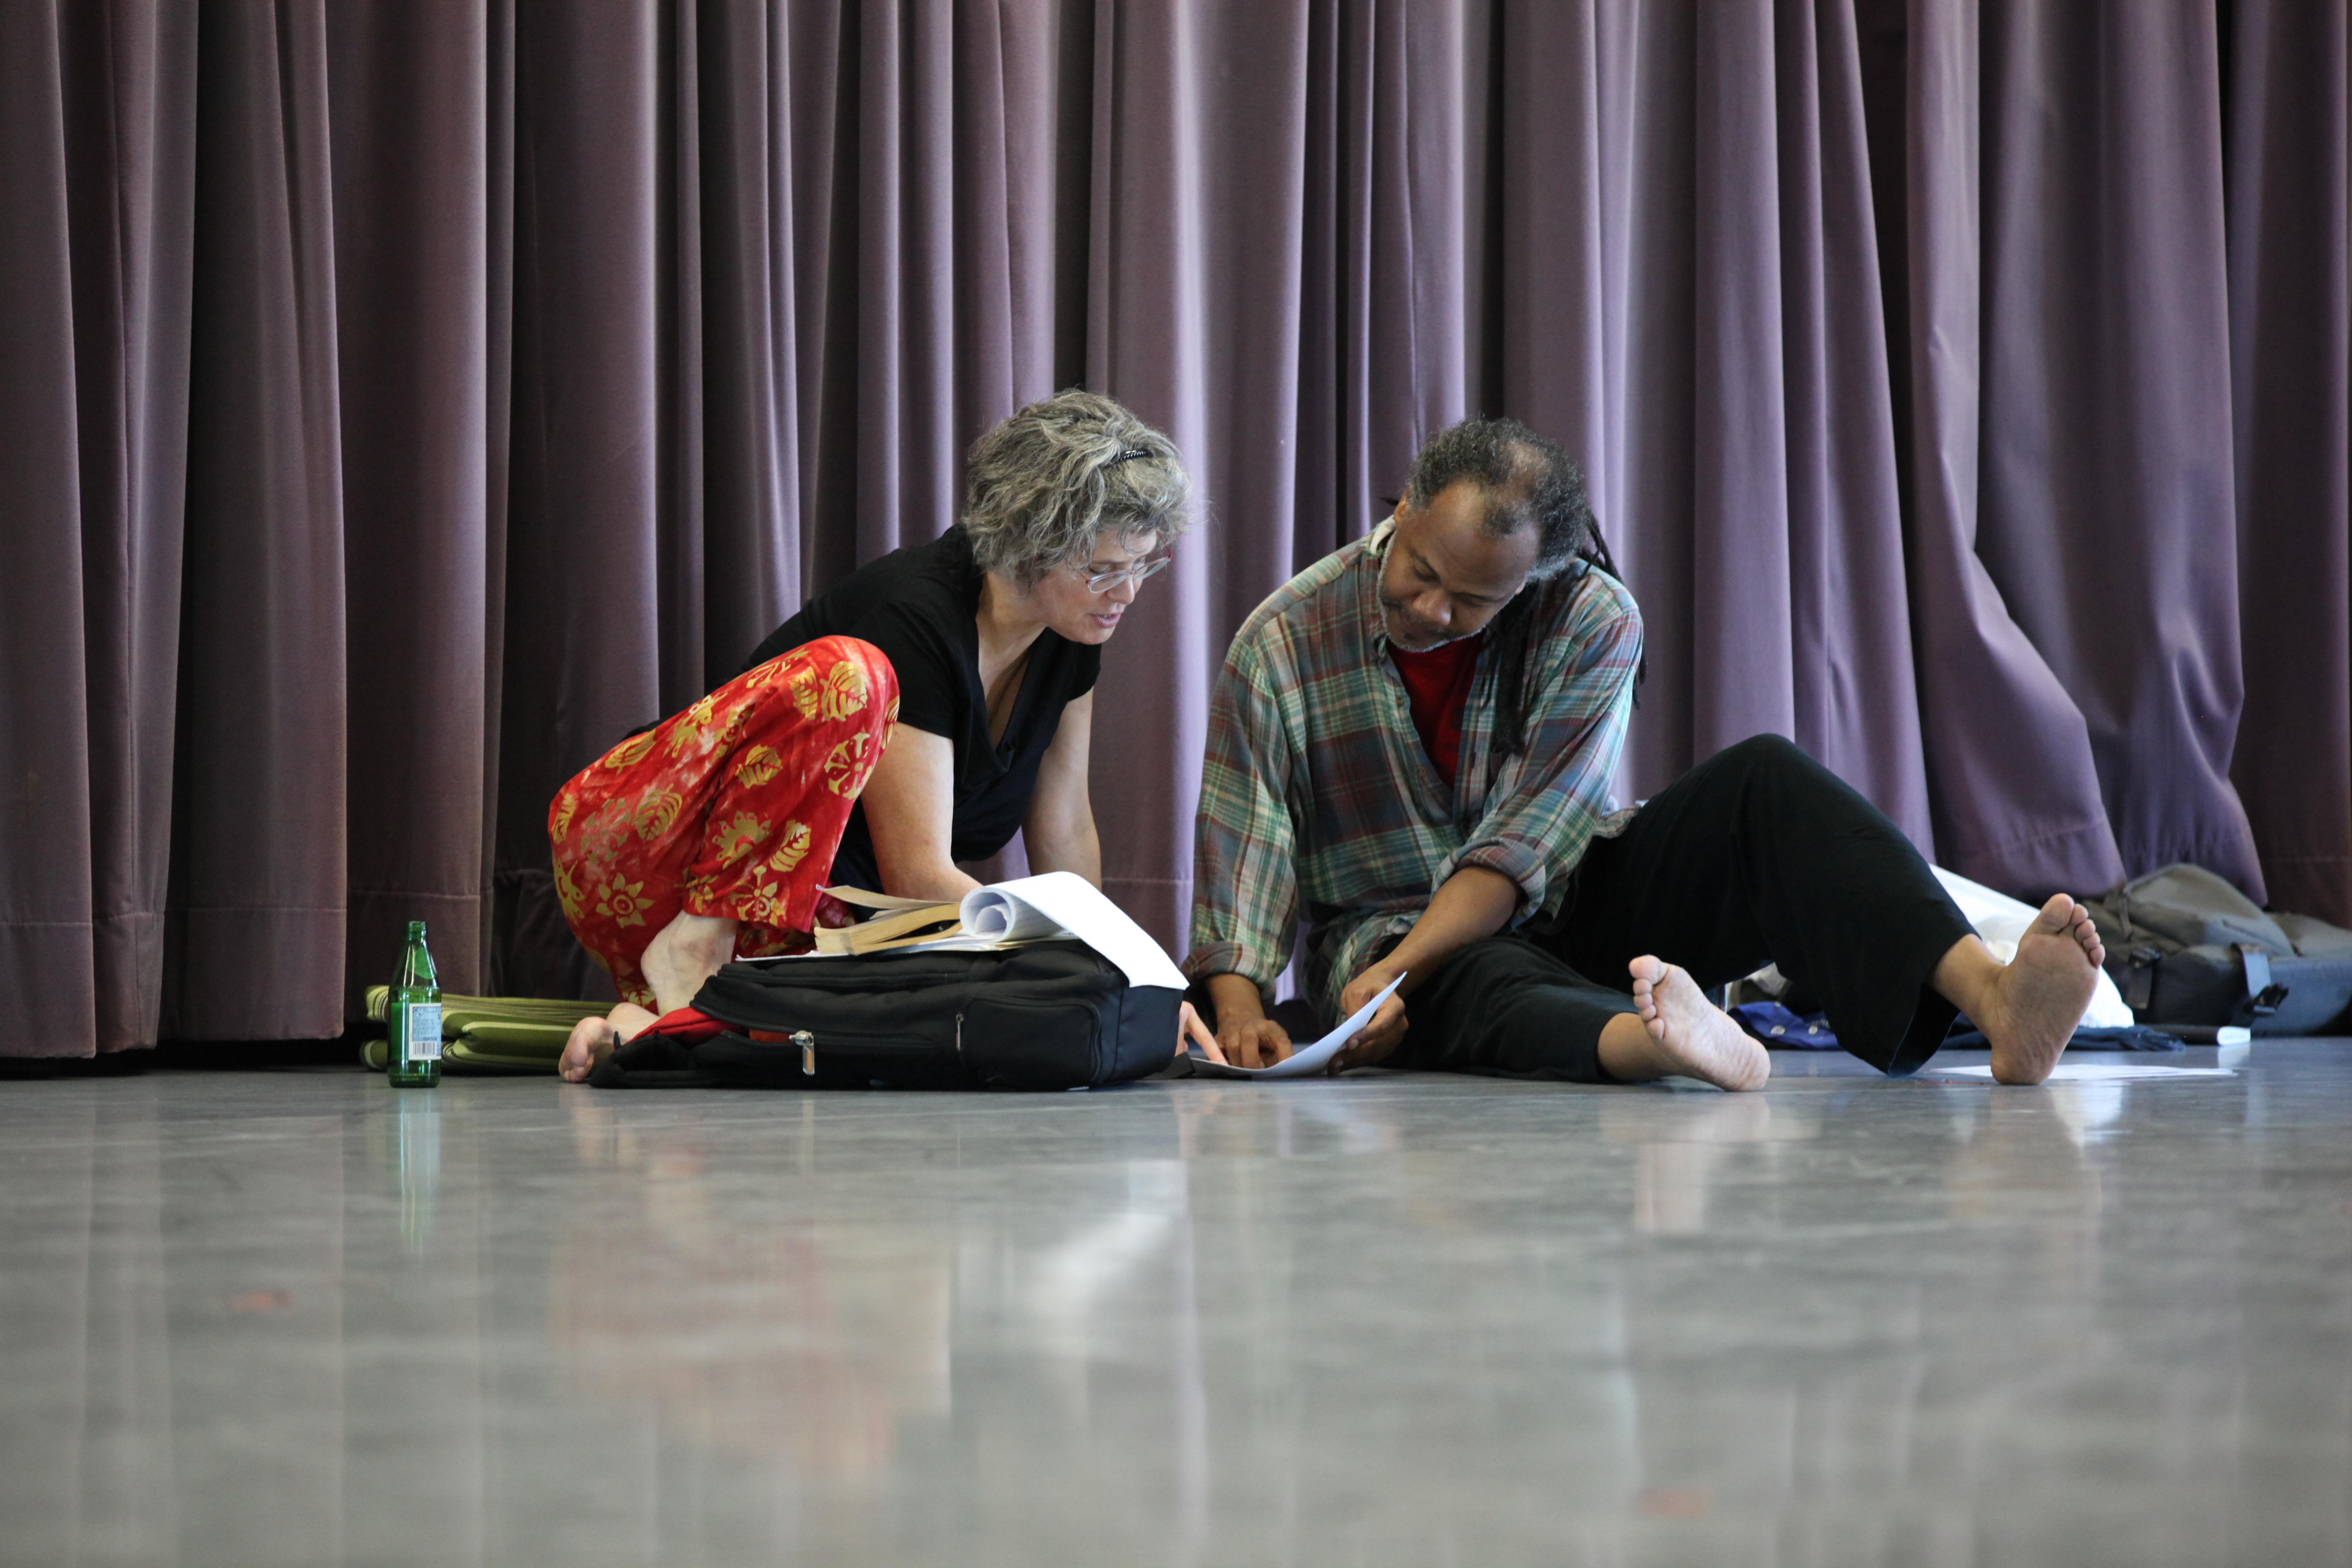 Dramaturge and DSA board member Susan Manning with Reggie Wilson of Fist and Heel Performance Group. Photo by Chris Cameron.